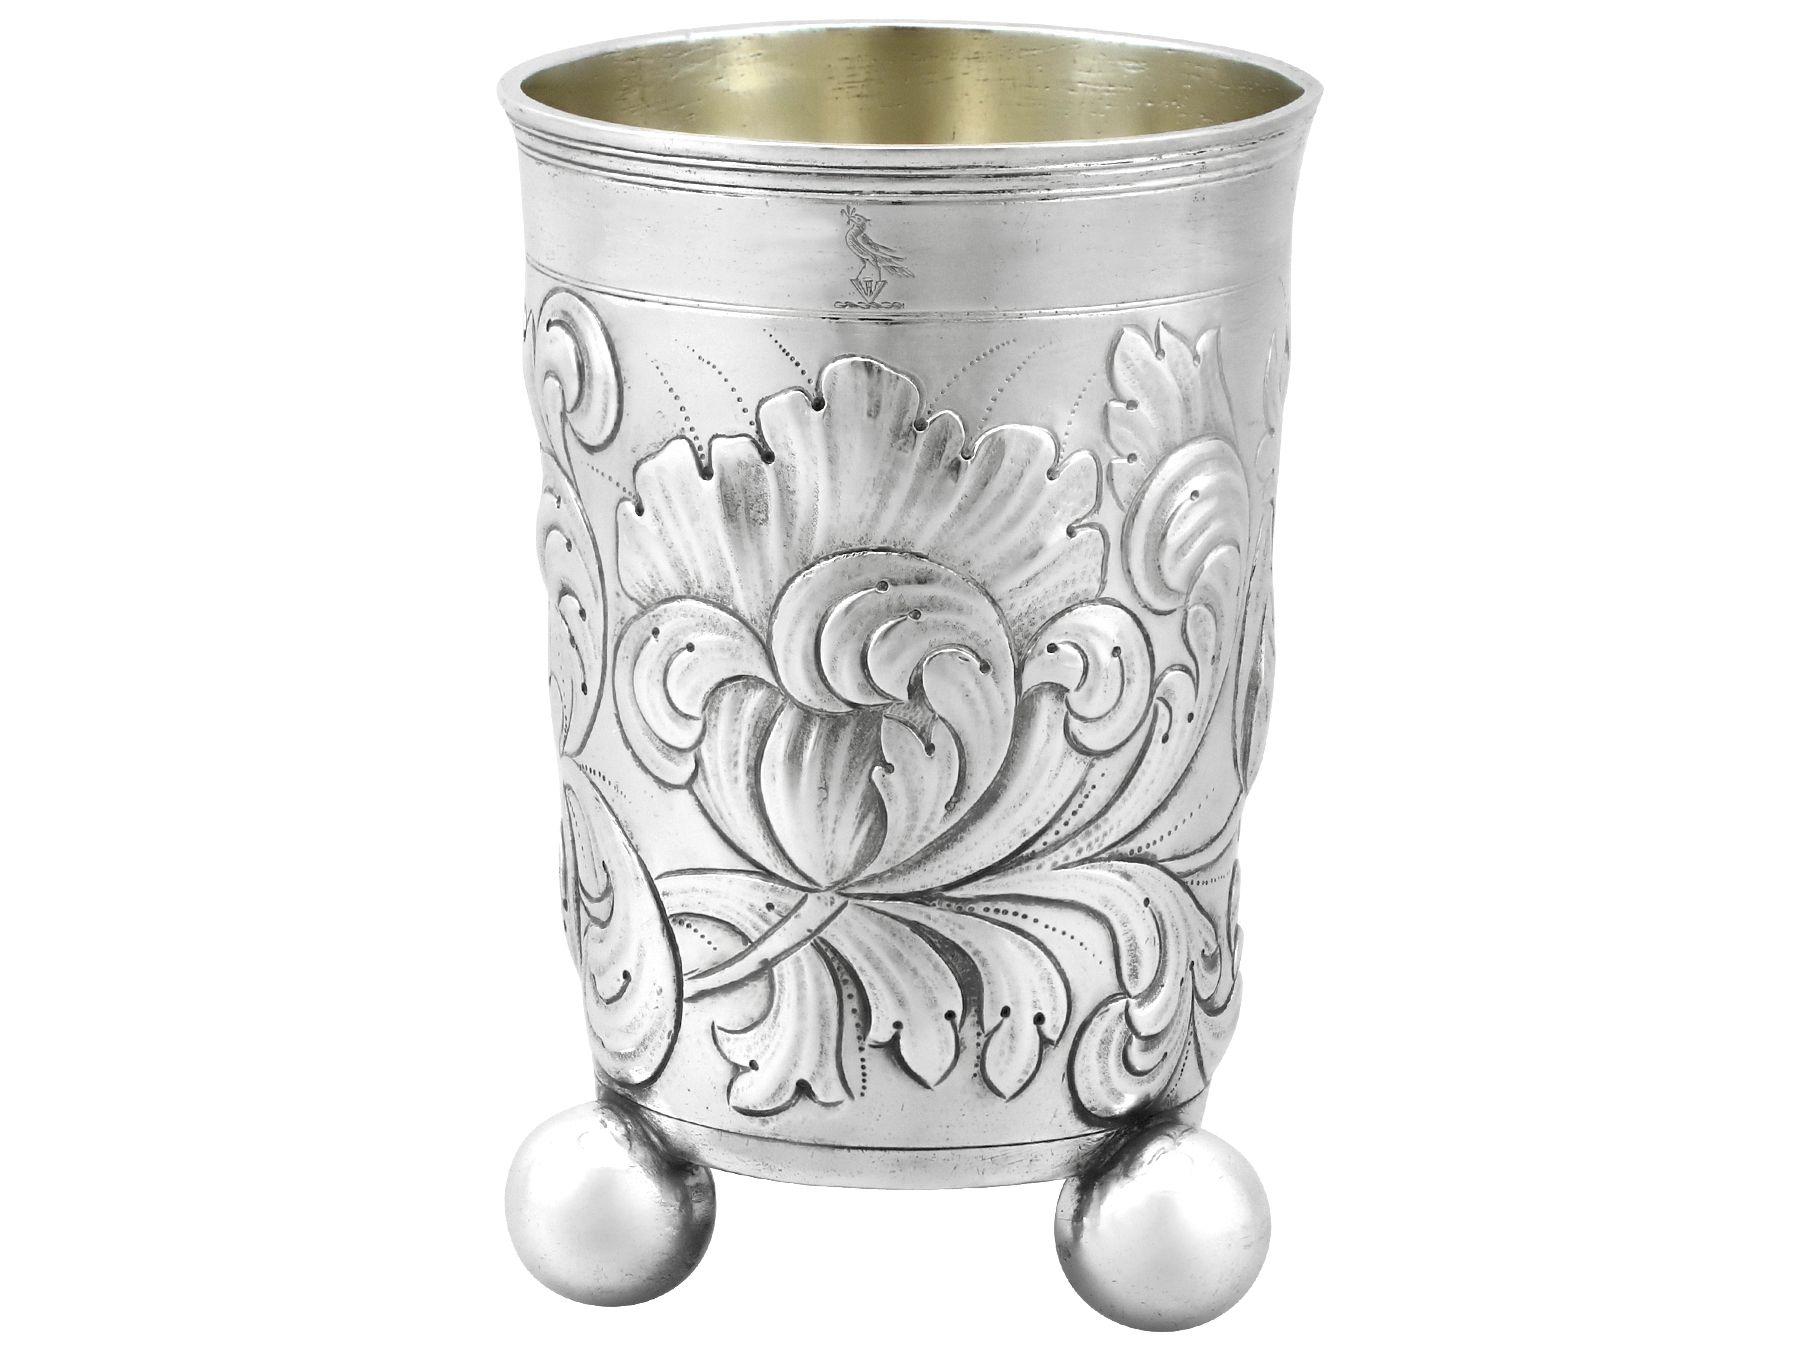 Antique German Silver Beaker In Excellent Condition For Sale In Jesmond, Newcastle Upon Tyne